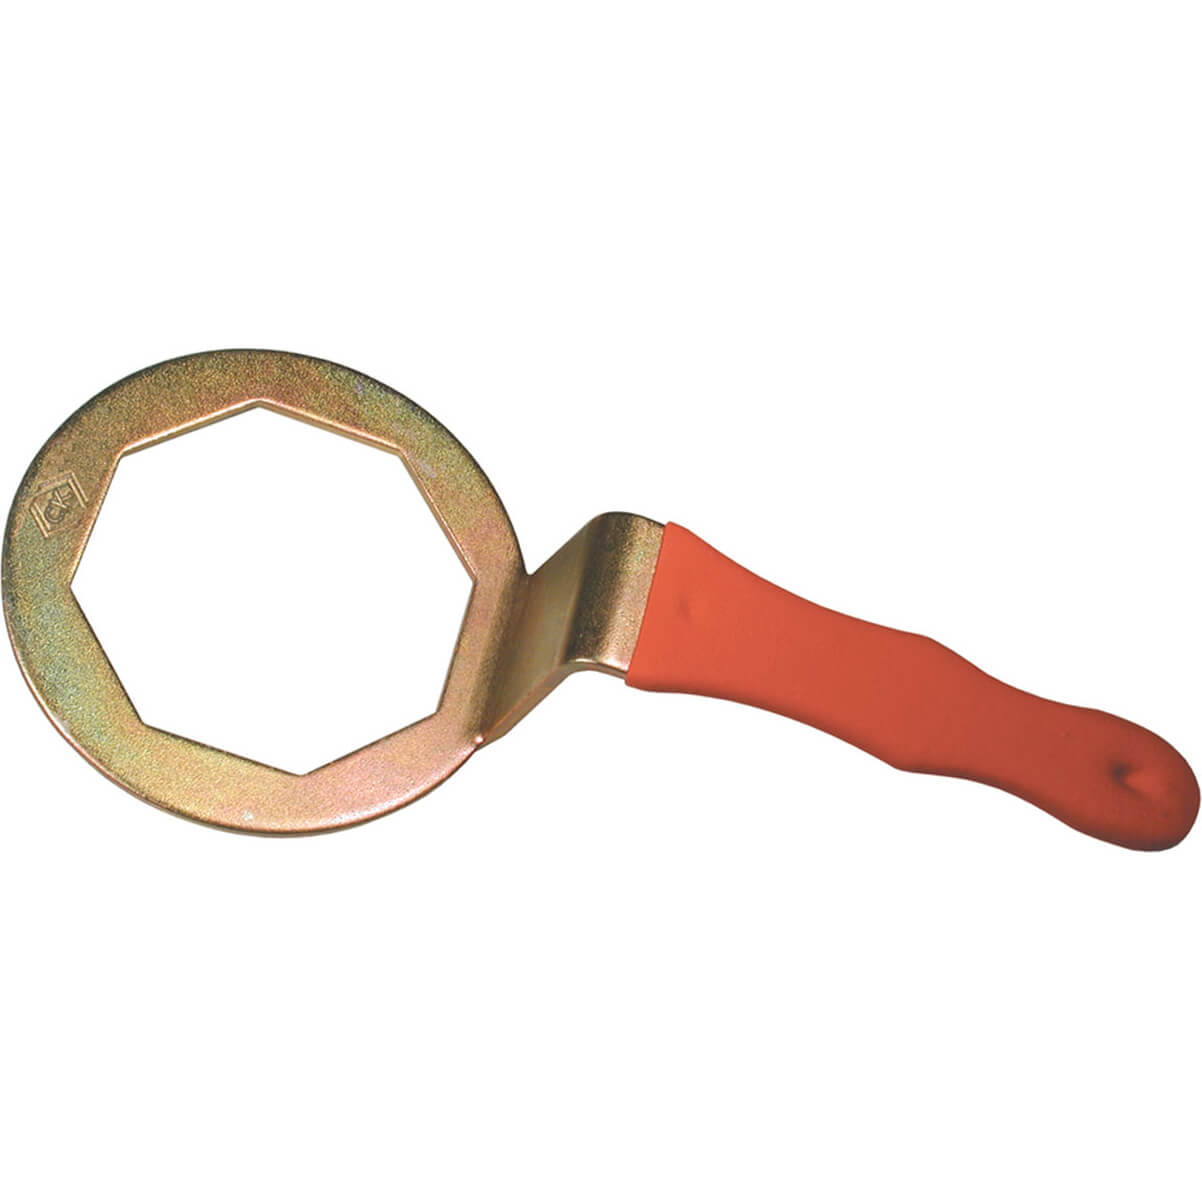 Image of CK Immersion Heater Spanner Metric 85mm